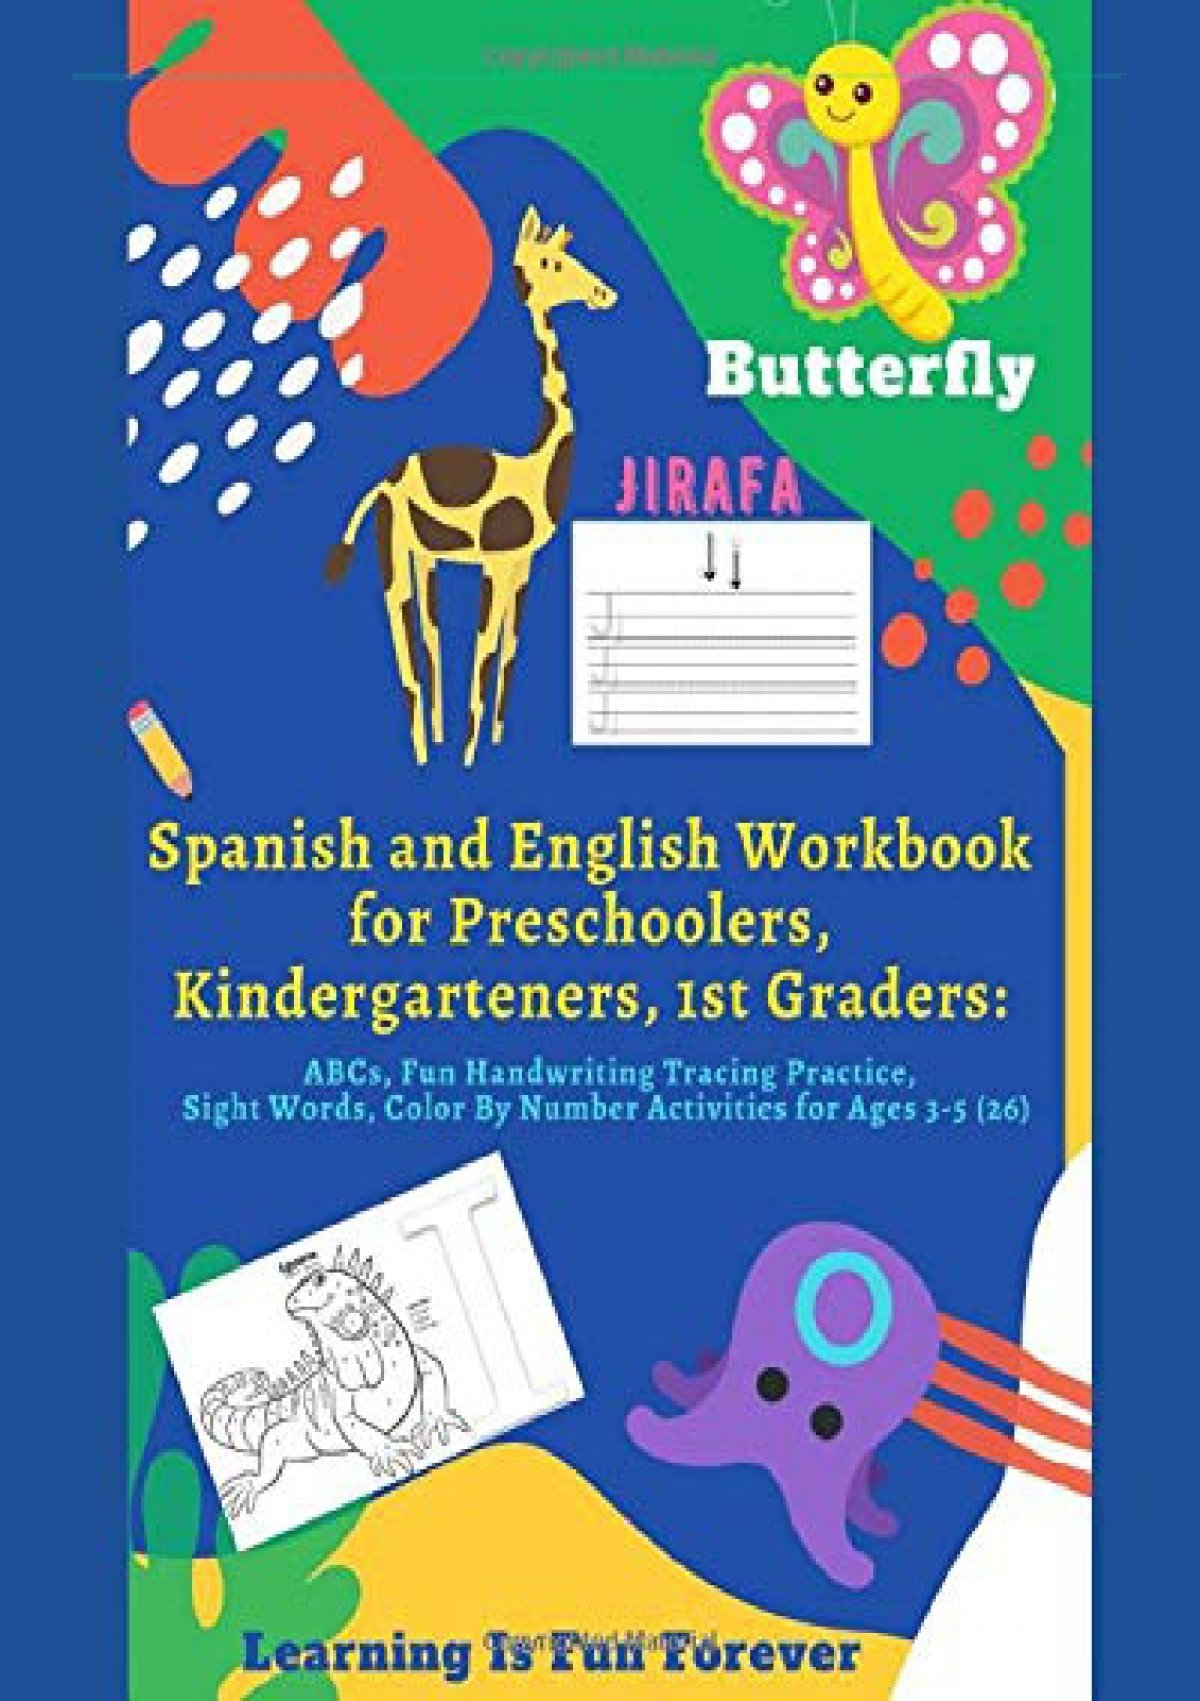 download-pdf-spanish-and-english-workbook-for-preschoolers